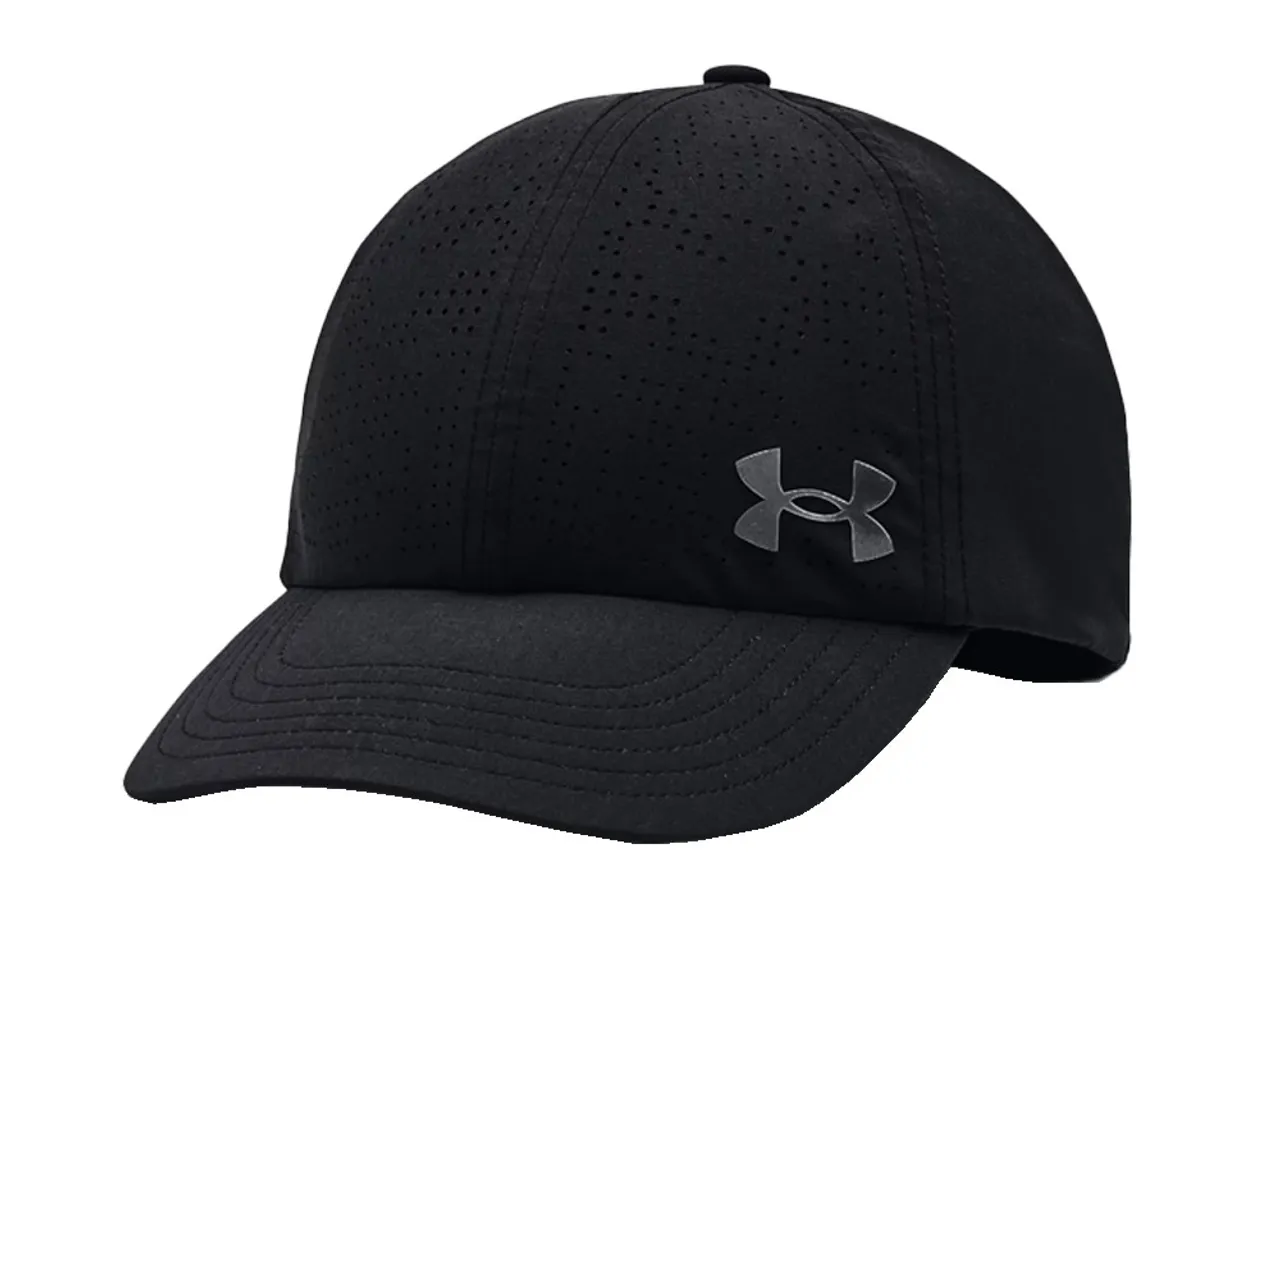 Under Armour Iso-Chill Breathe Adjustable Women's Cap